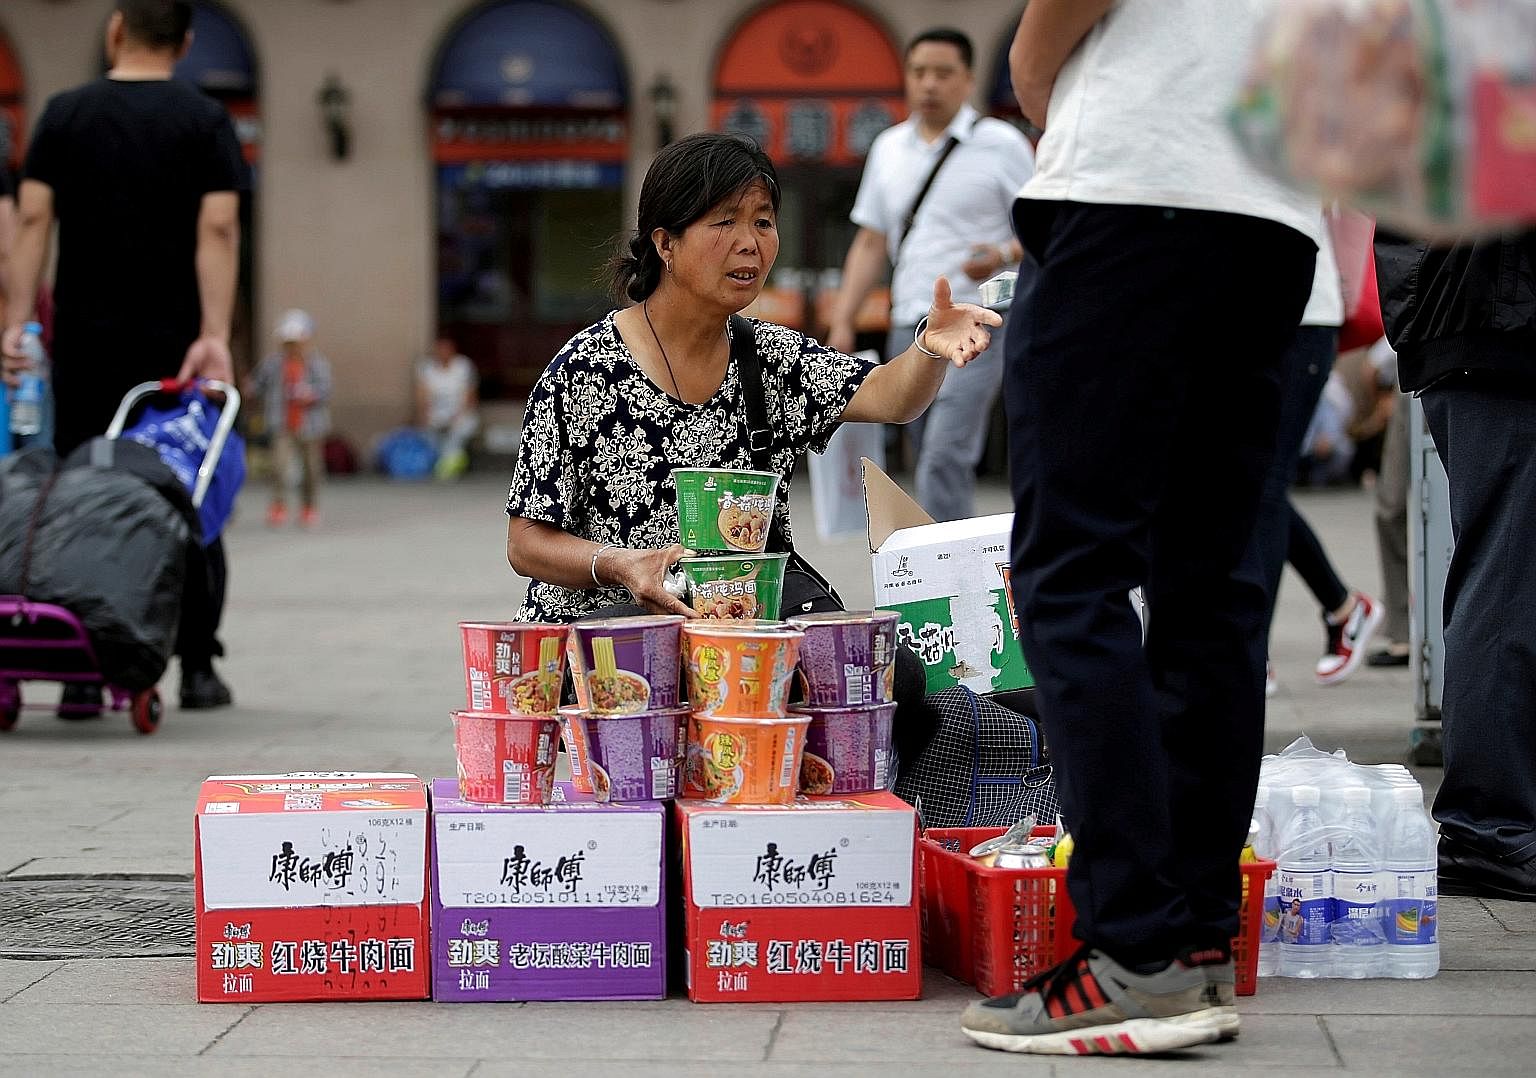 Instant noodles being sold at Beijing Railway Station in China. Just as China's economy has slowed, so too has its appetite for instant noodles.